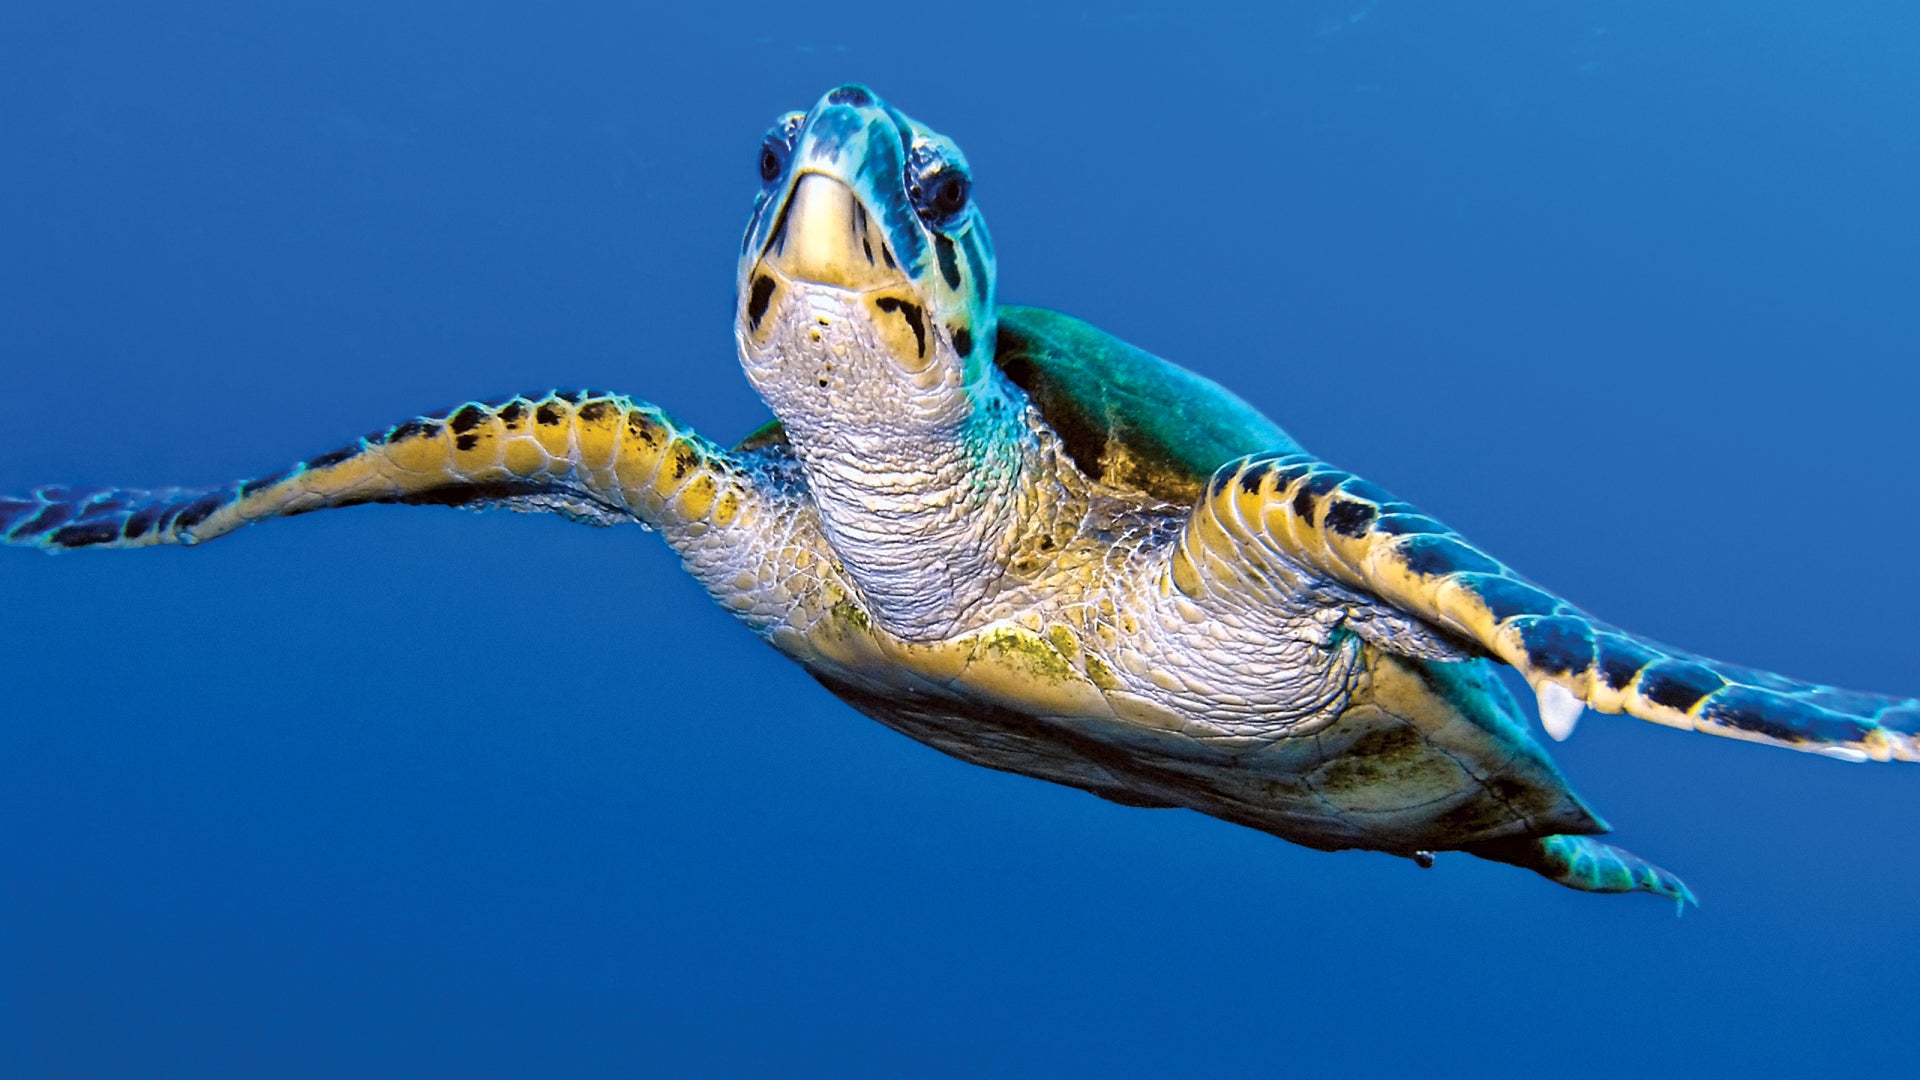 10 Fun facts for the Turtle!